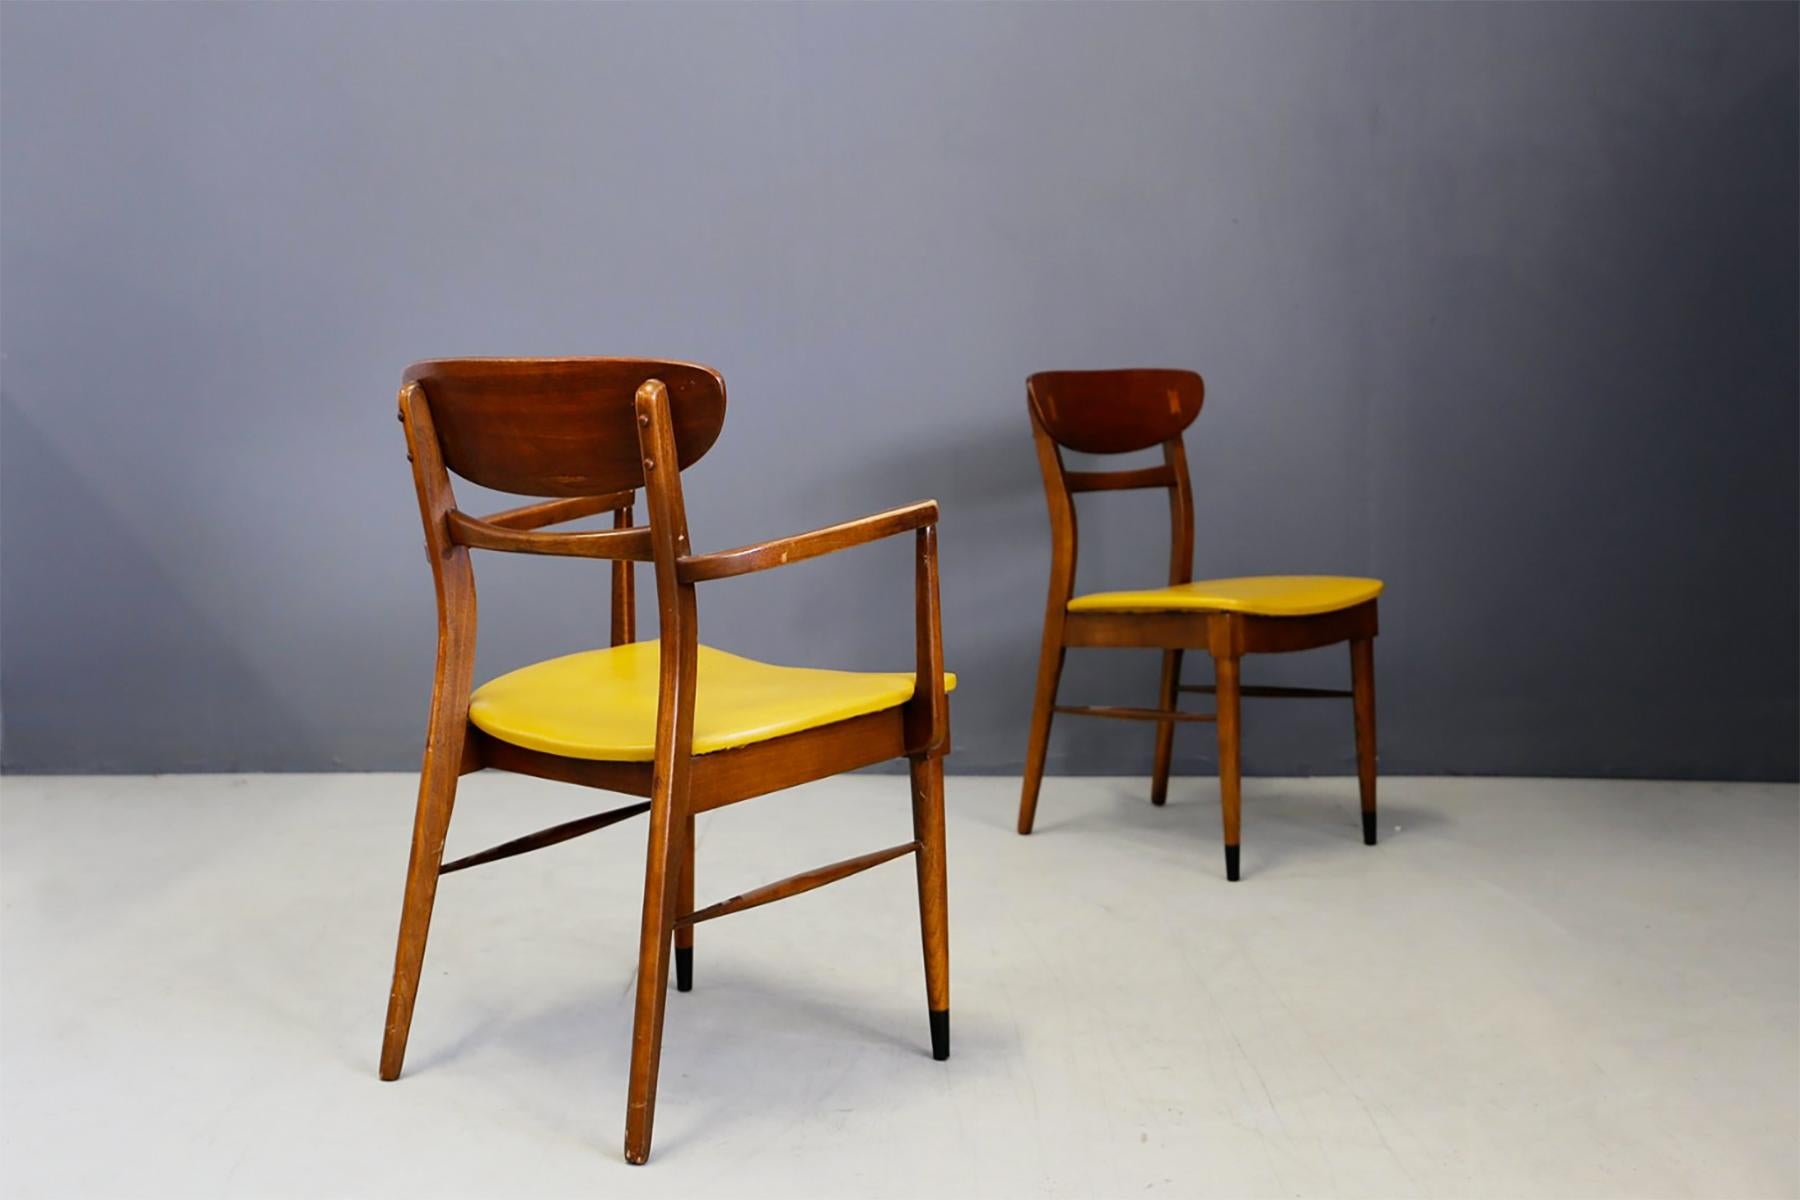 North American Set of 4 American Chairs in Wood and Leather, 1950s